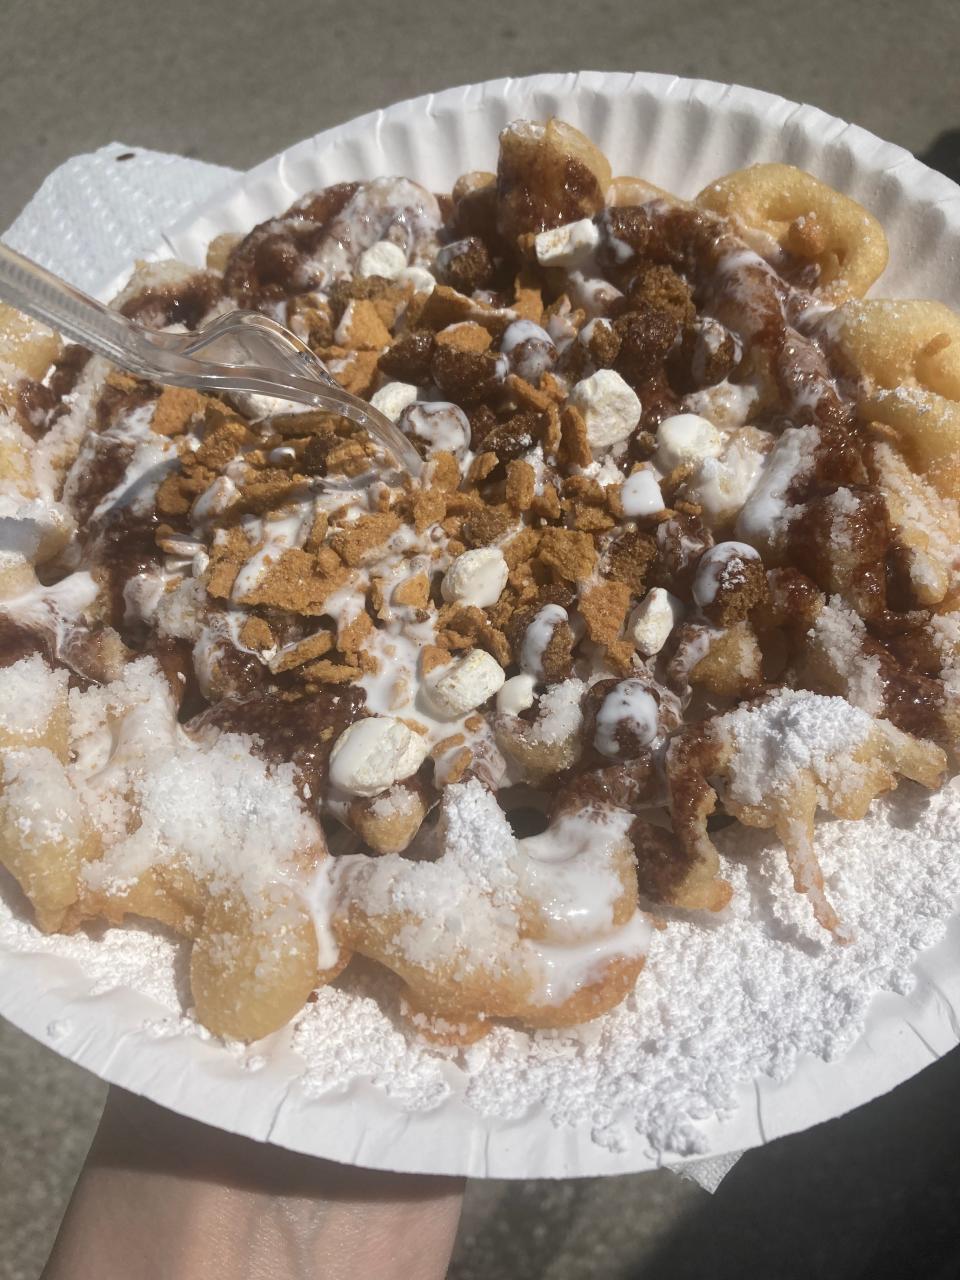 Someone with a sweet tooth will like the S'mores Funnel Cake best, with its creamy chocolate and crispy graham cracker flavors.